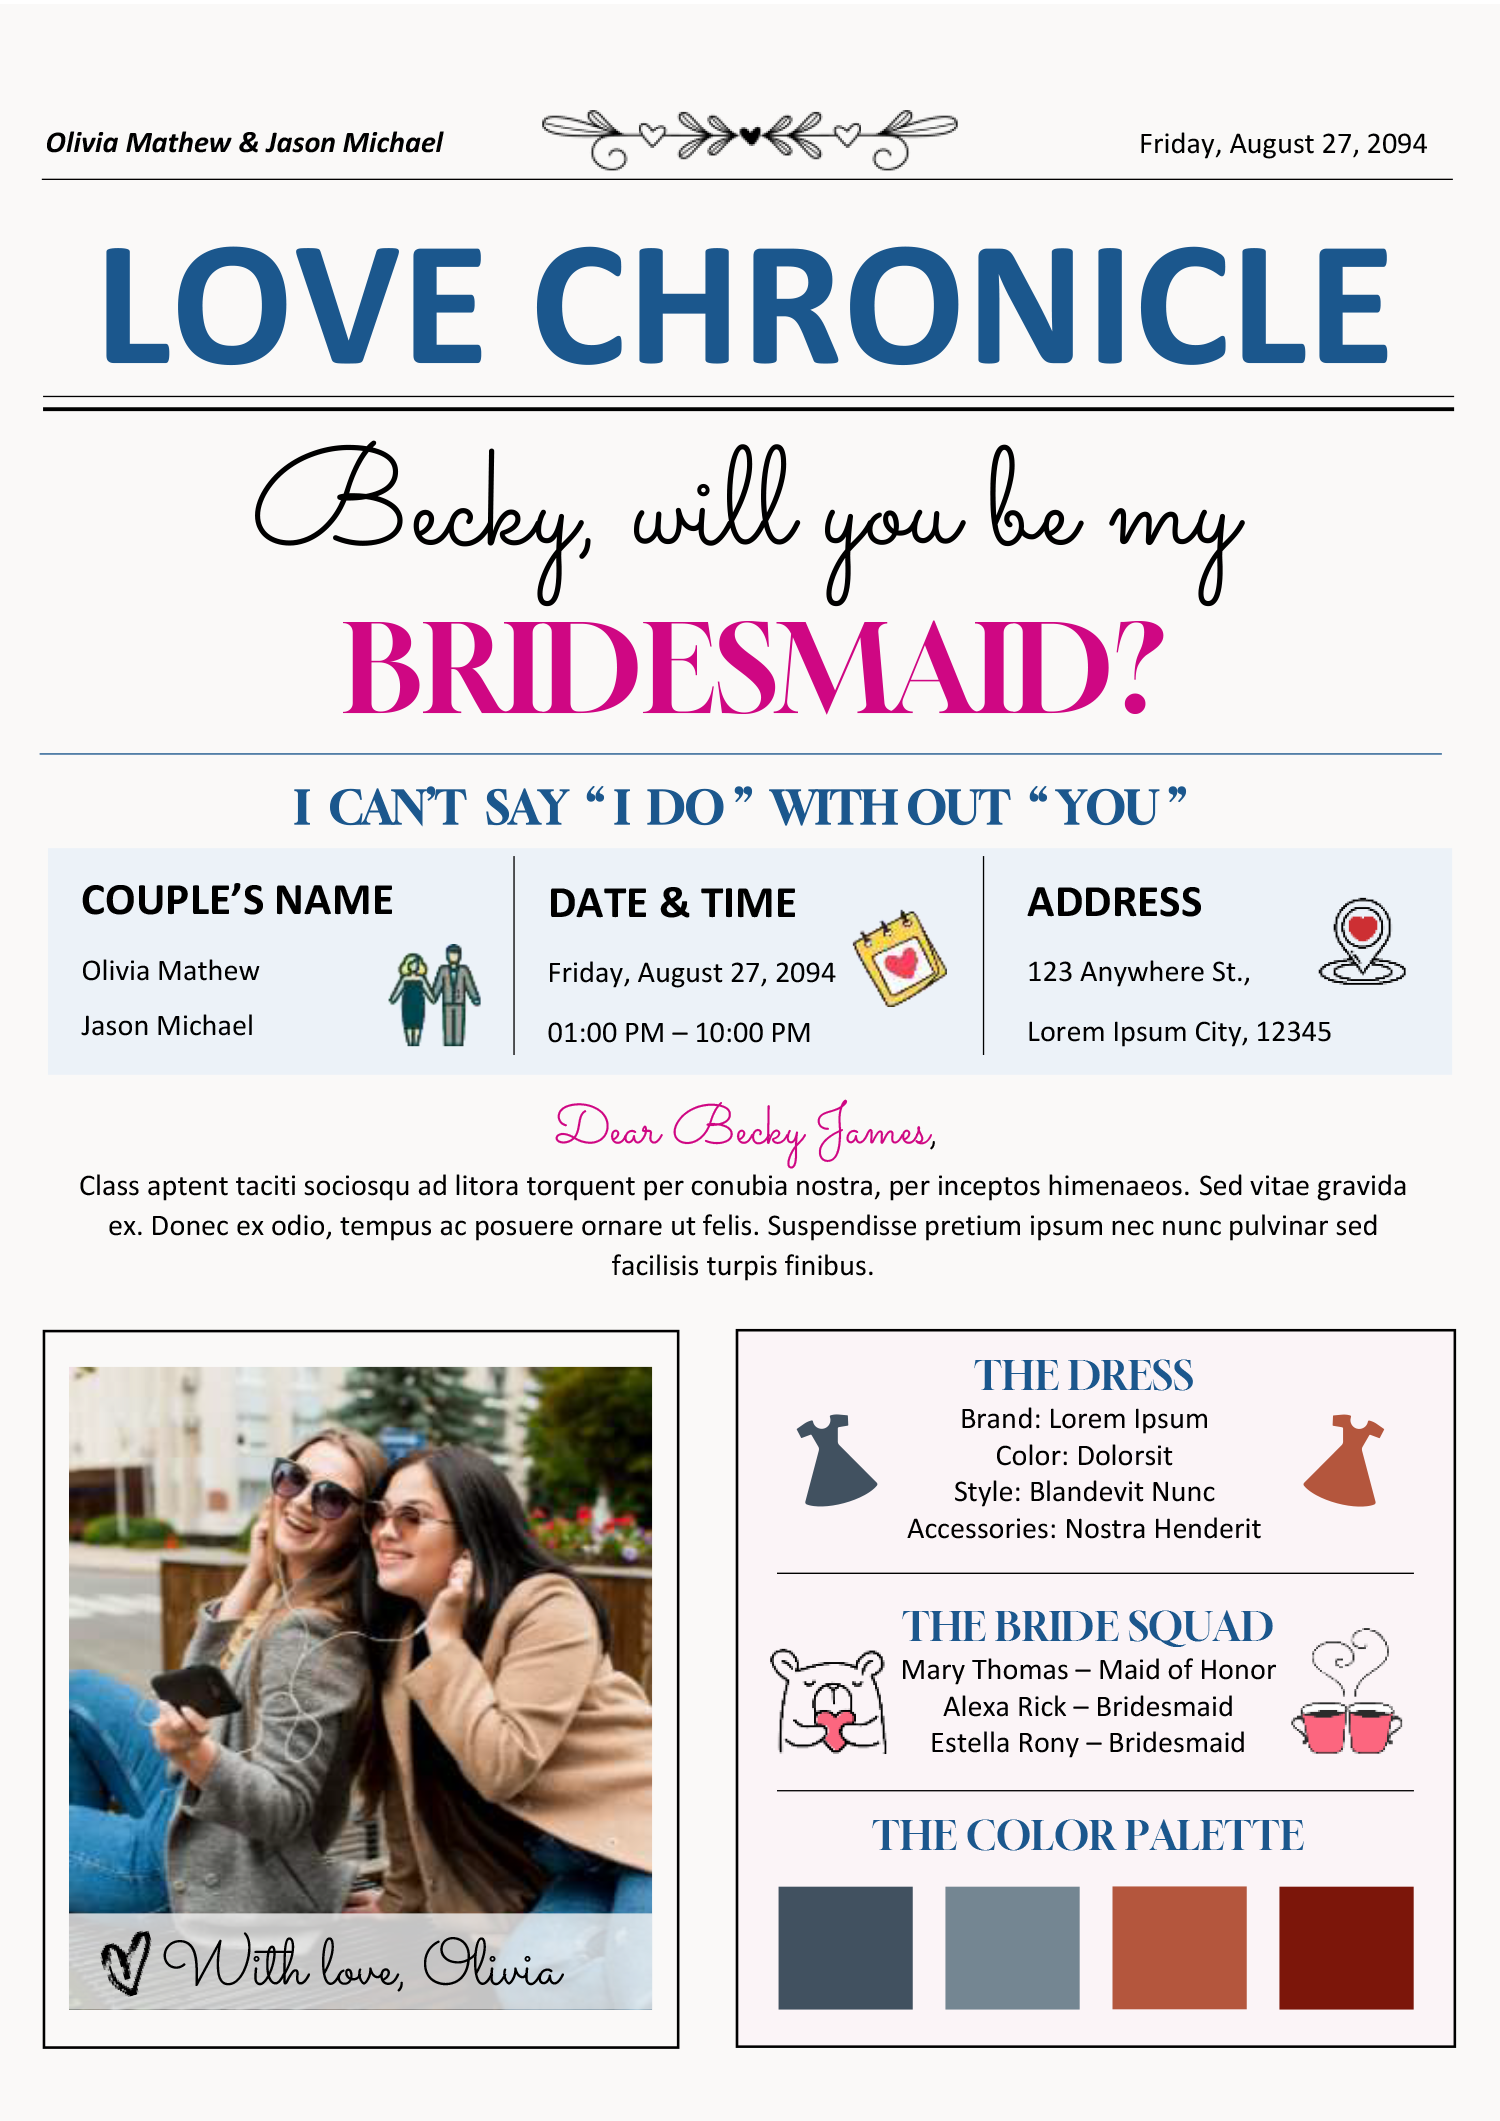 Bridesmaid A4 Newspaper Template - Front Page